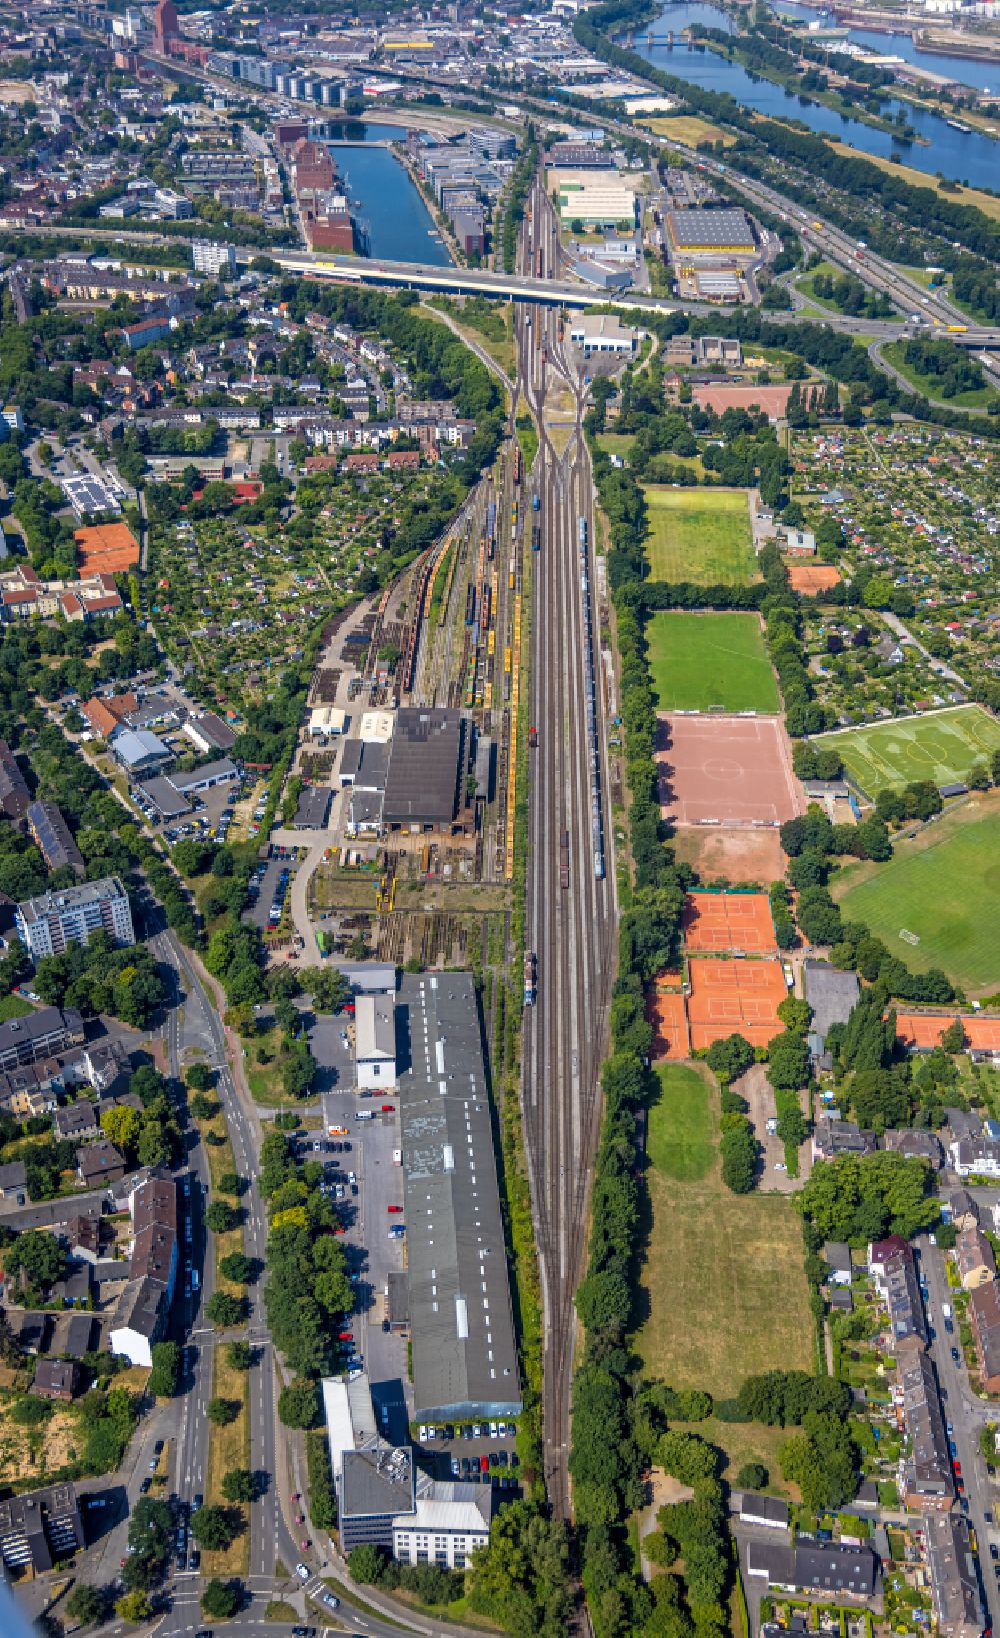 Aerial image Duisburg - Storage and shunting sidings at the railway depot and repair shop, maintenance and repair of freight transport trains on Wintgensstrasse in the district Duissern in Duisburg in the Ruhr area in the state North Rhine-Westphalia, Germany